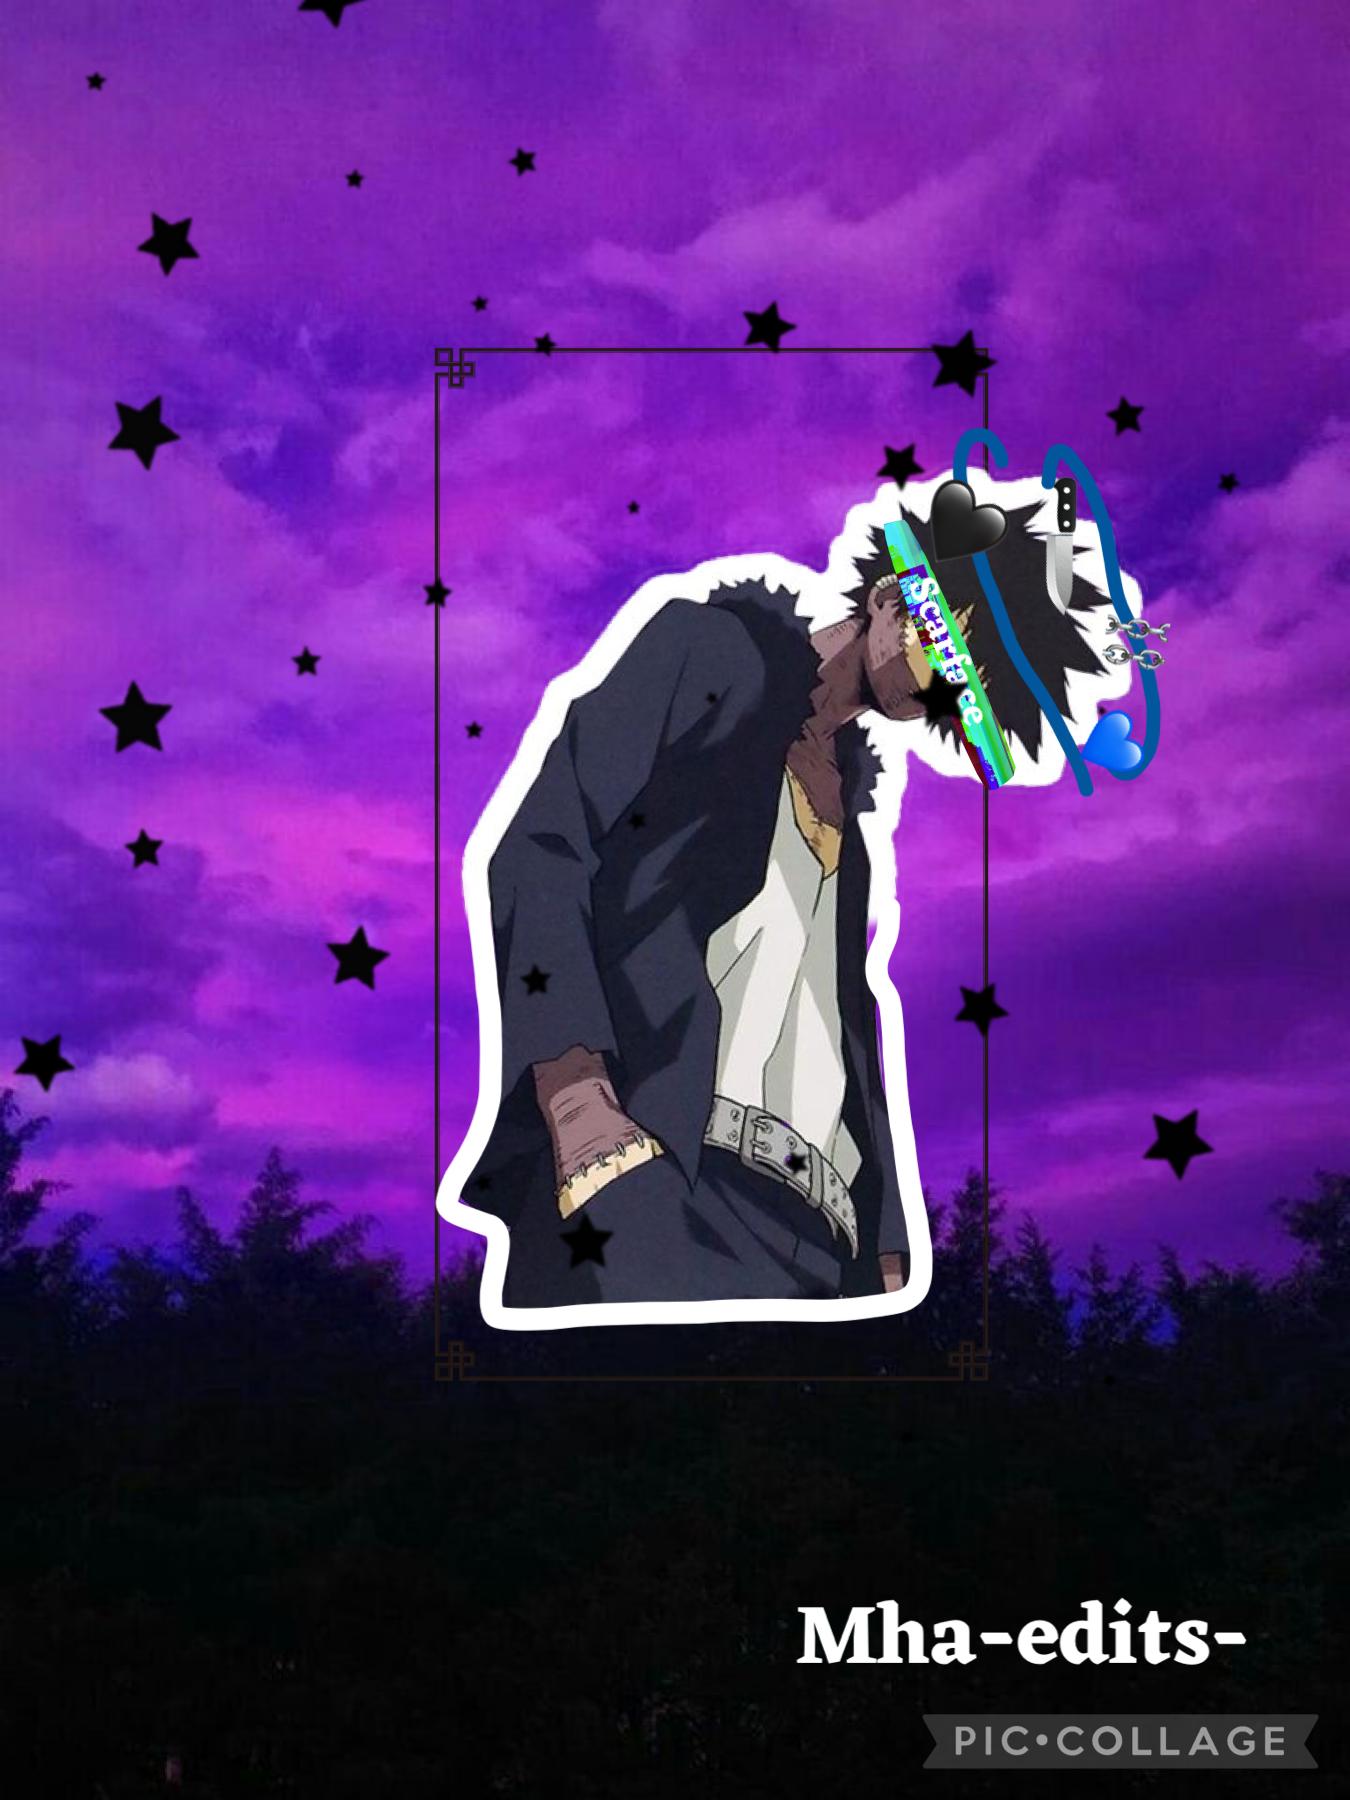 💙Tap⛓
🔪dabi🔪 I been wanting to make a dabi edit for a long time but I didn’t know how to style it till now 😑🙄 
